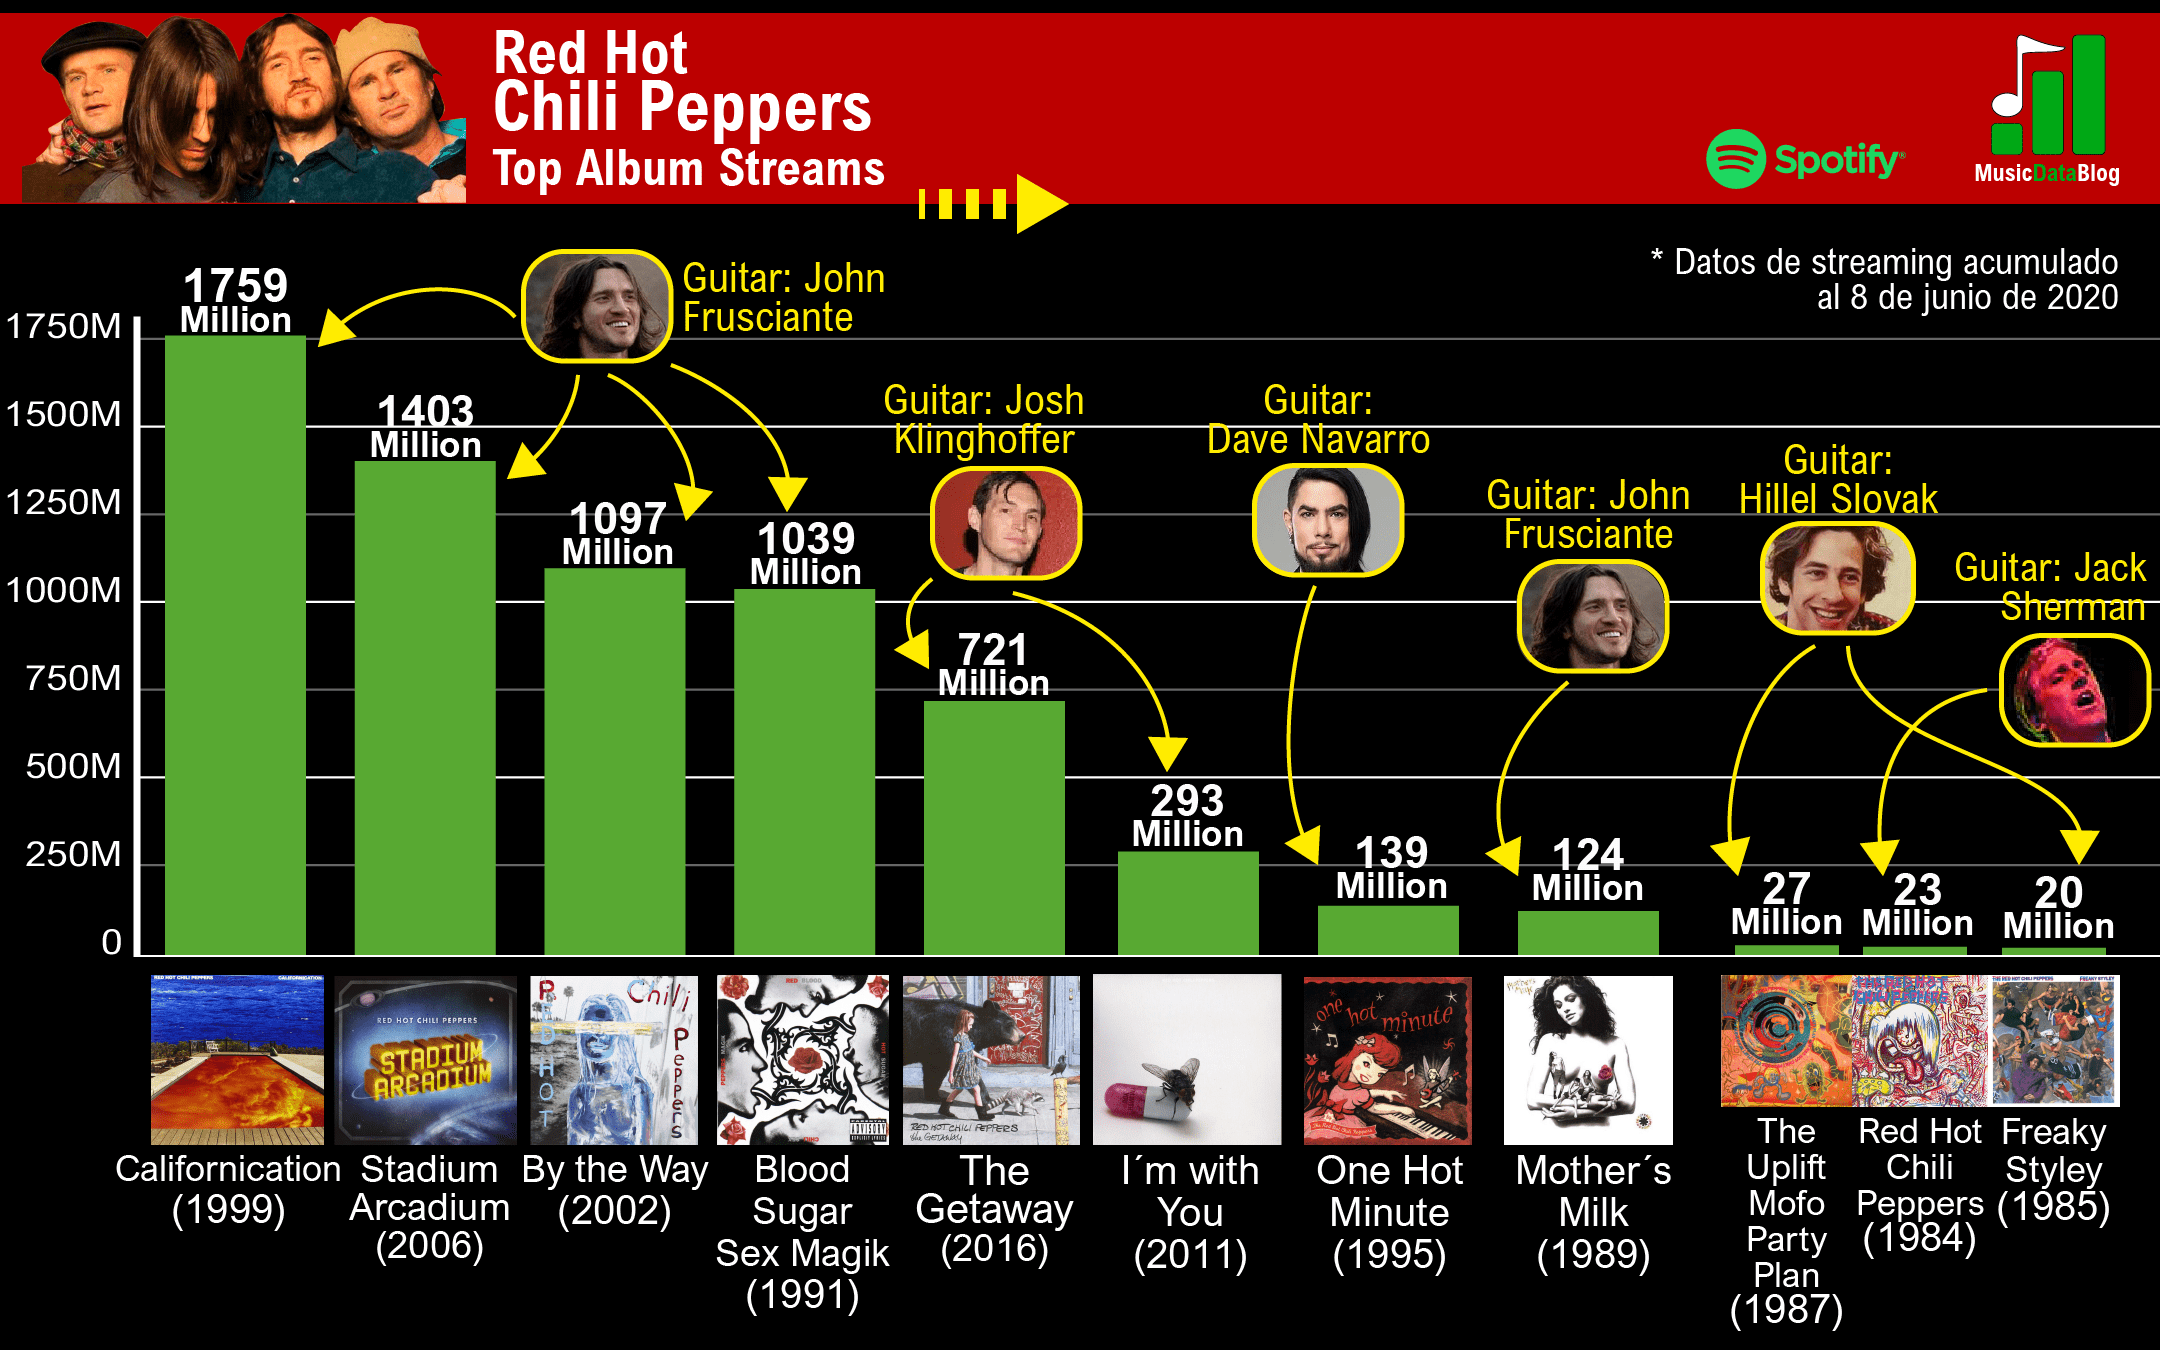 red hot chili peppers discography ranked albums